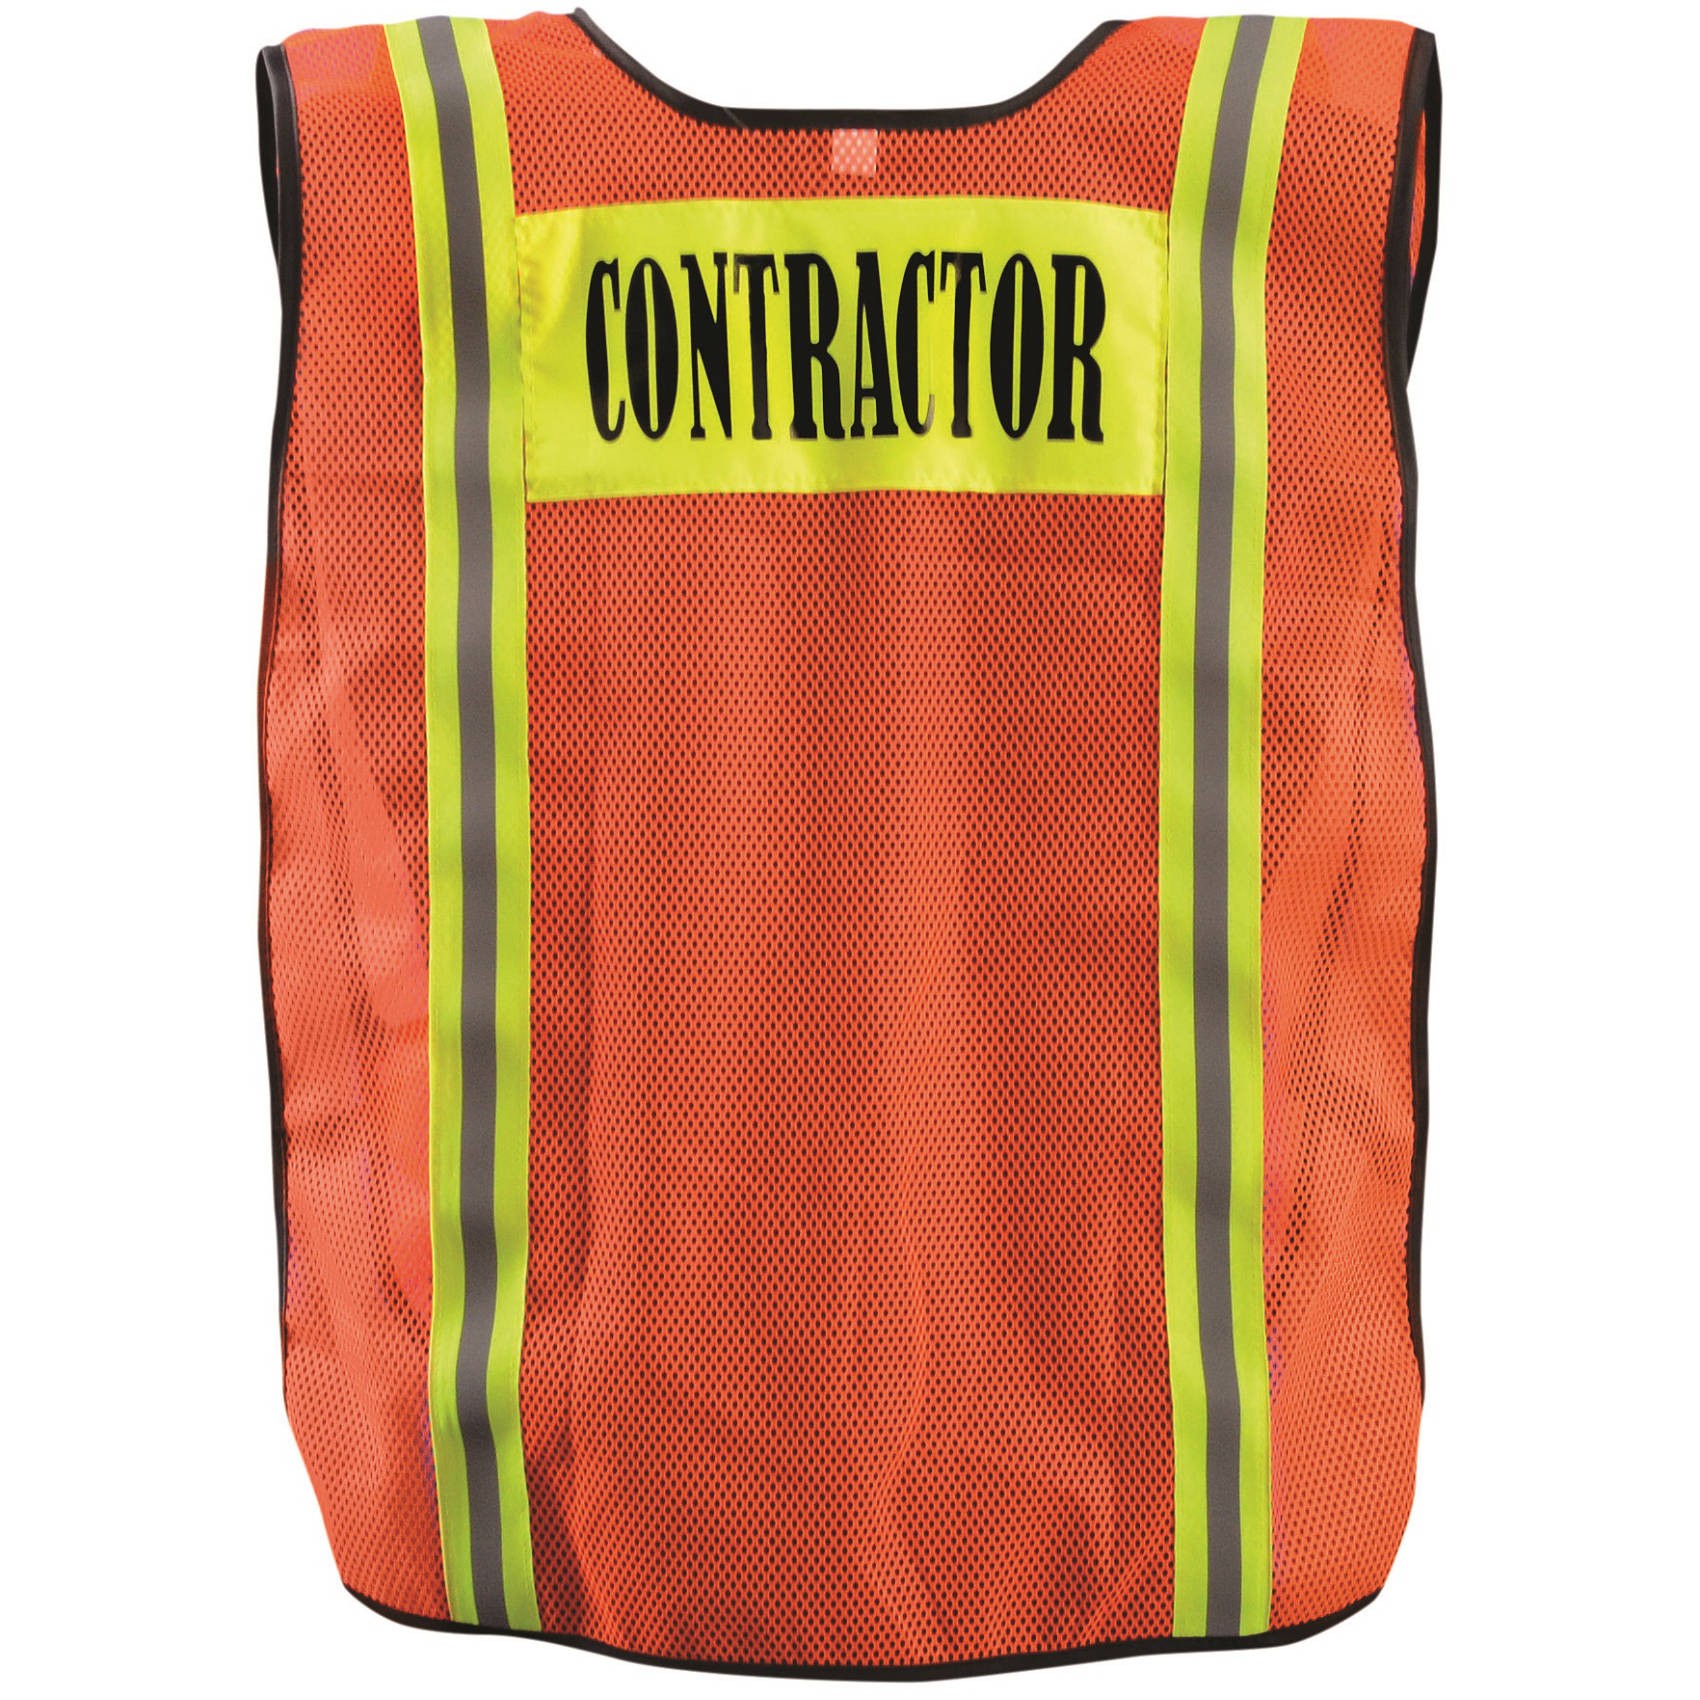 OccuNomix LUX-XCON Mesh Contractor Safety Vest | FullSource.com